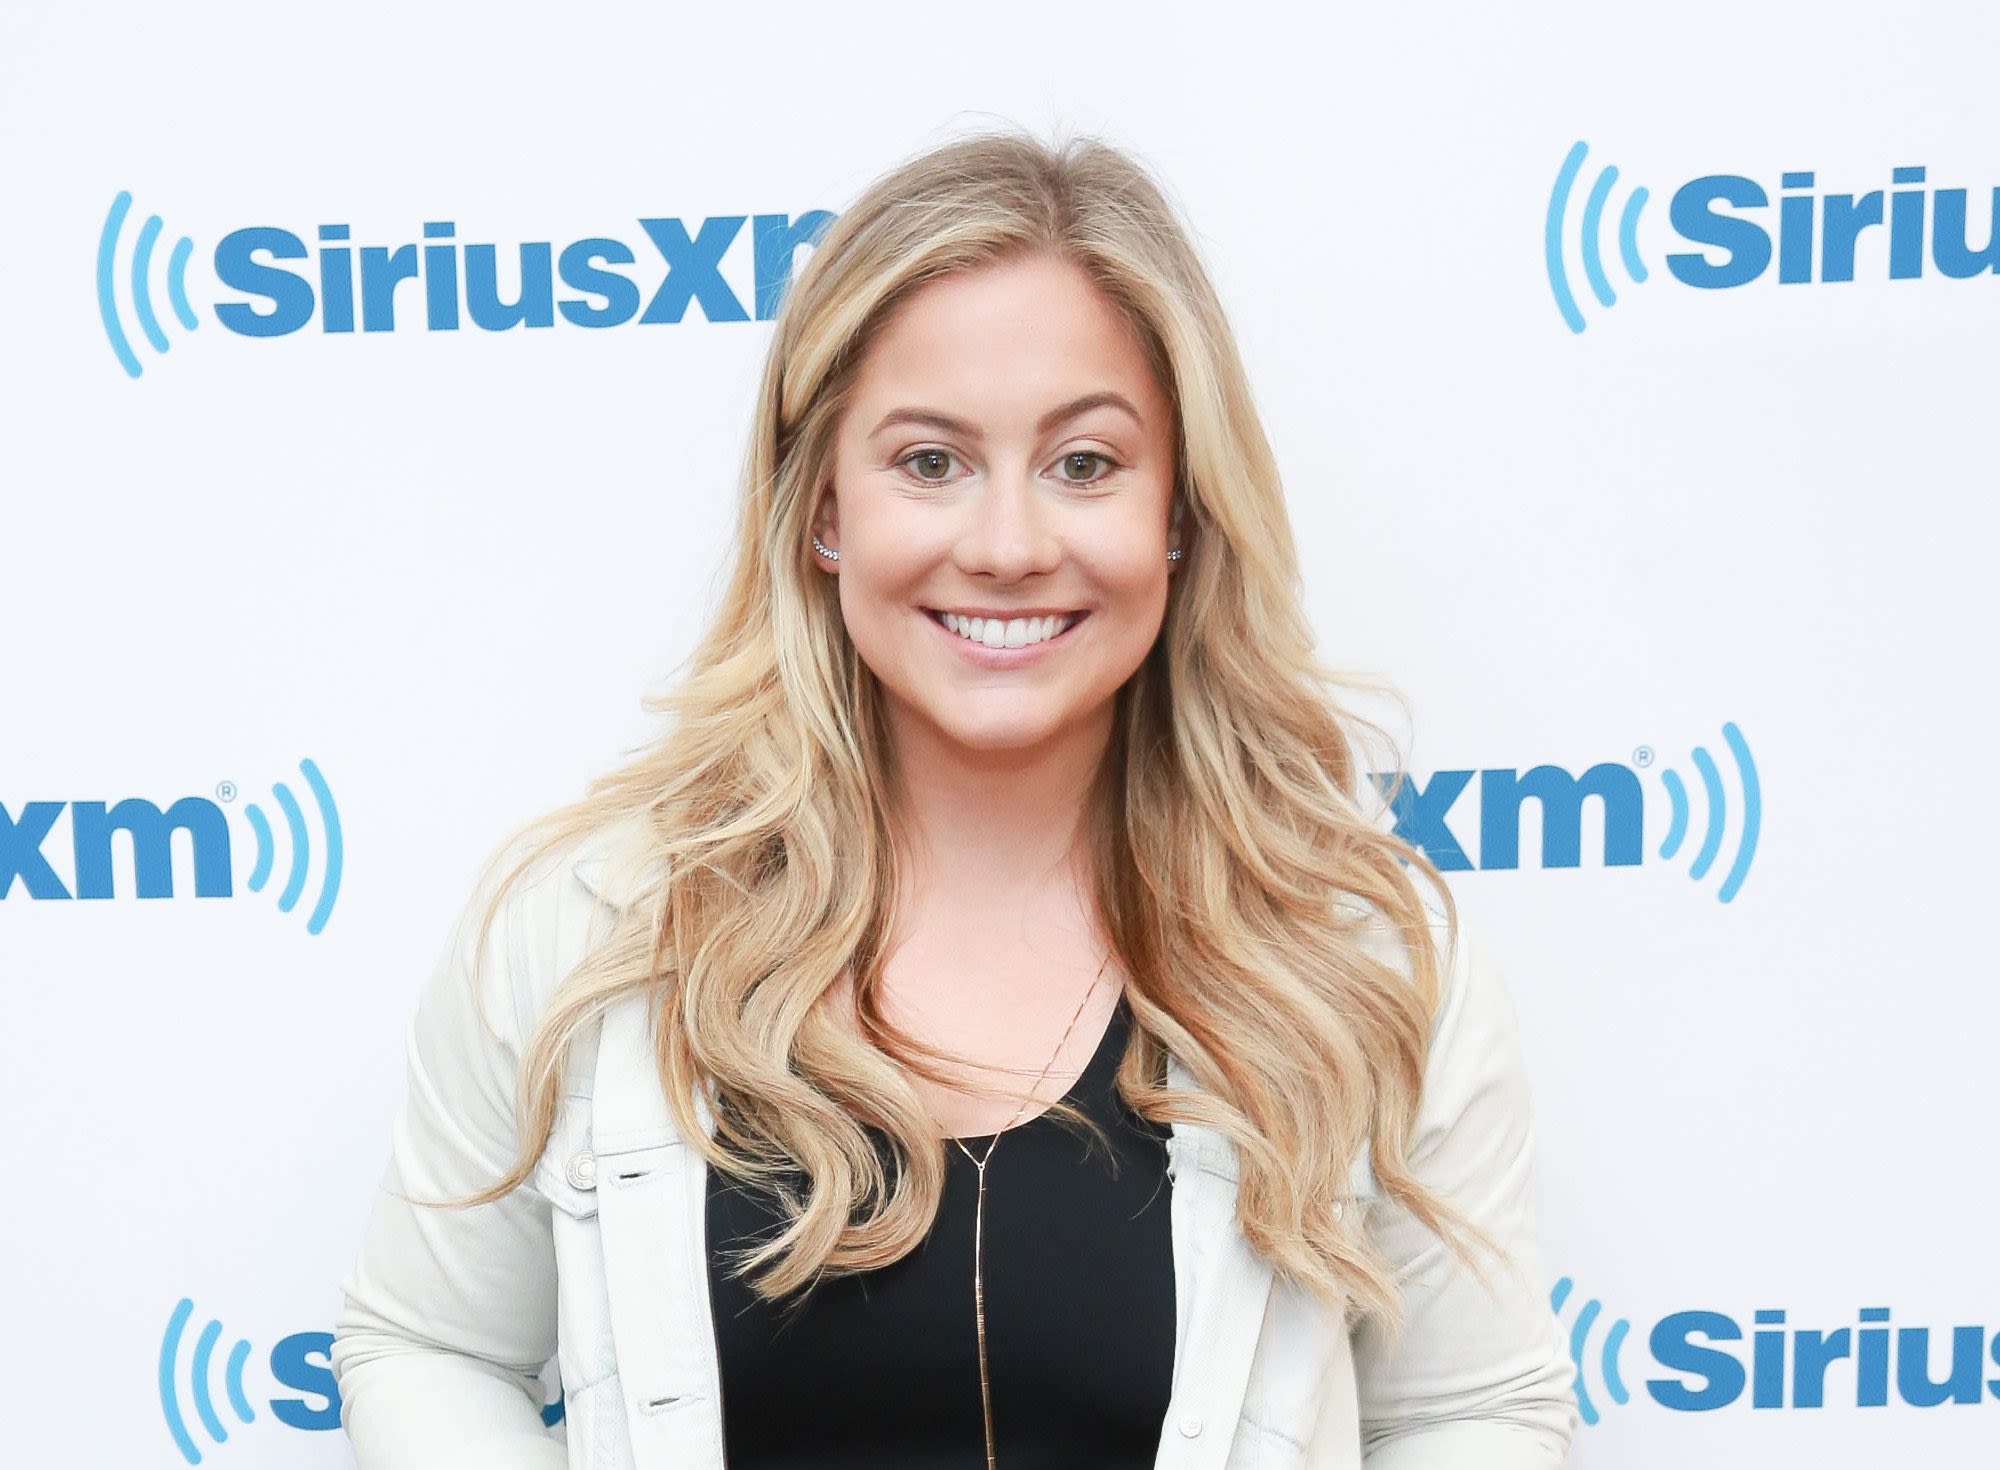 Shawn Johnson’s 3 Kids (Including Baby Bear!) Show off Their Karate Skills in the Cutest New Video